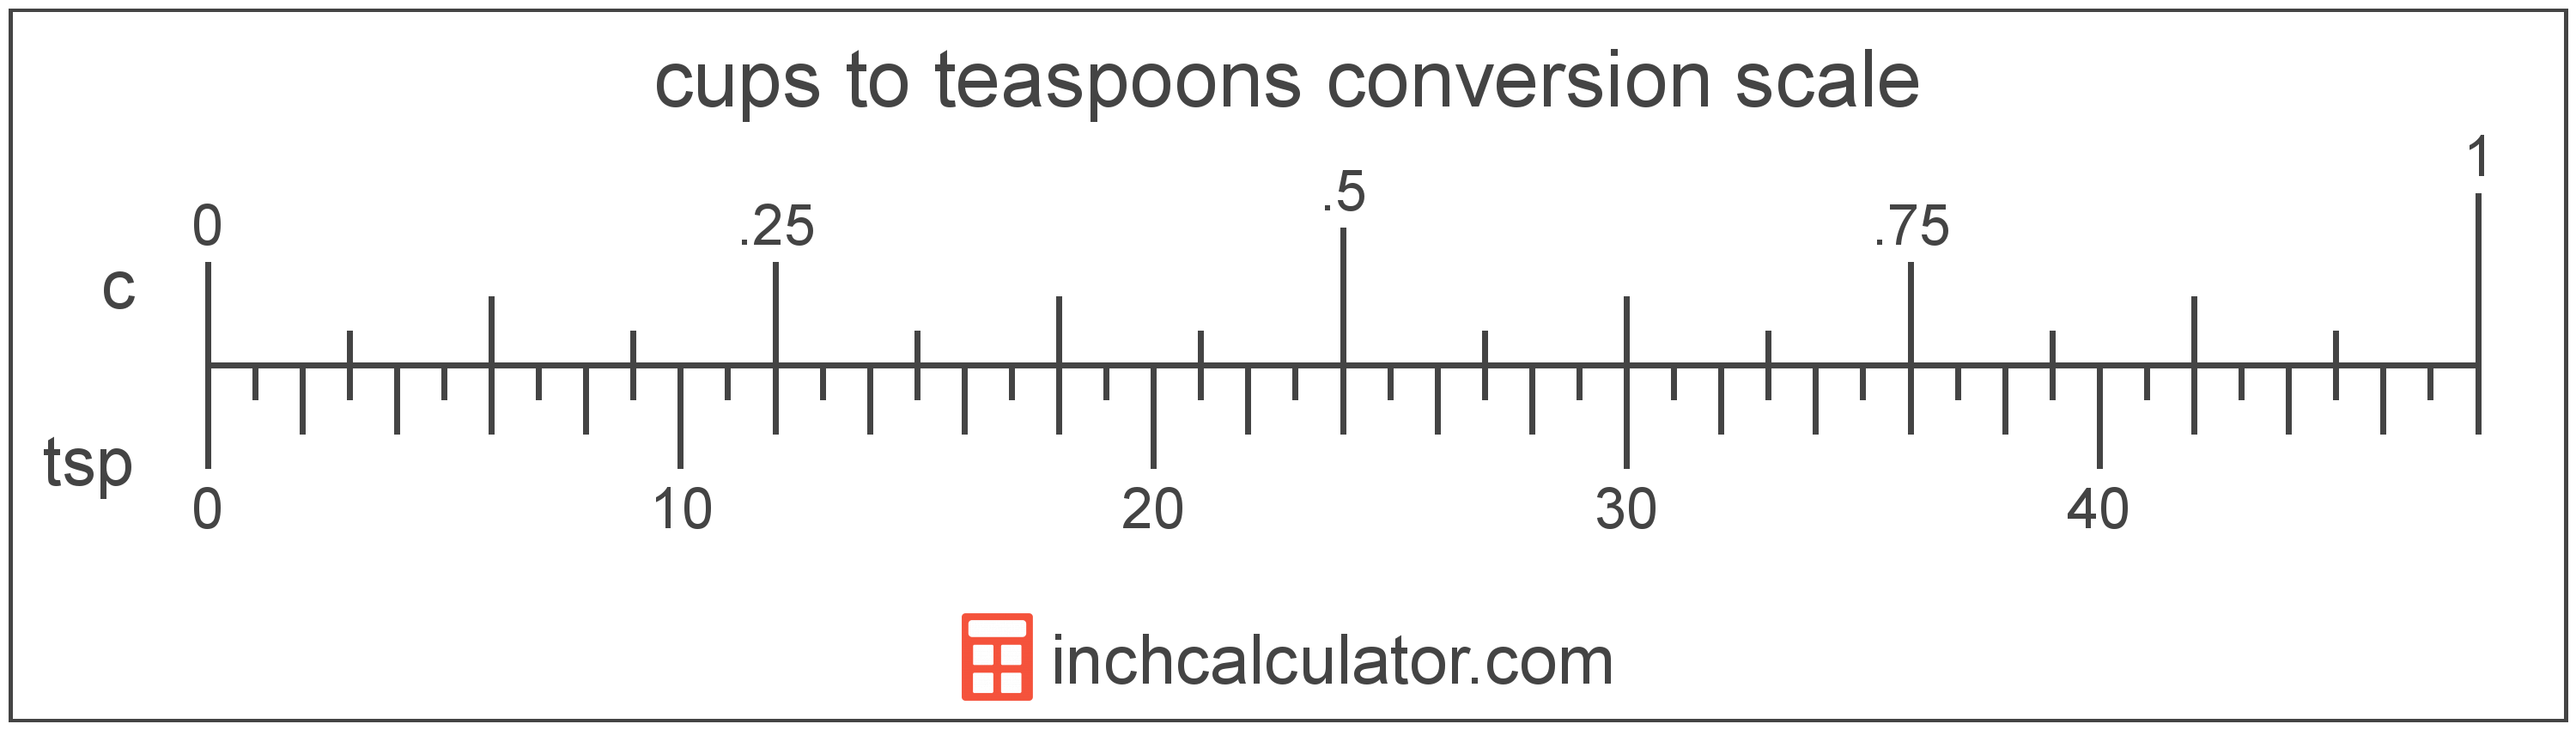 conversion scale showing teaspoons and equivalent cups volume values